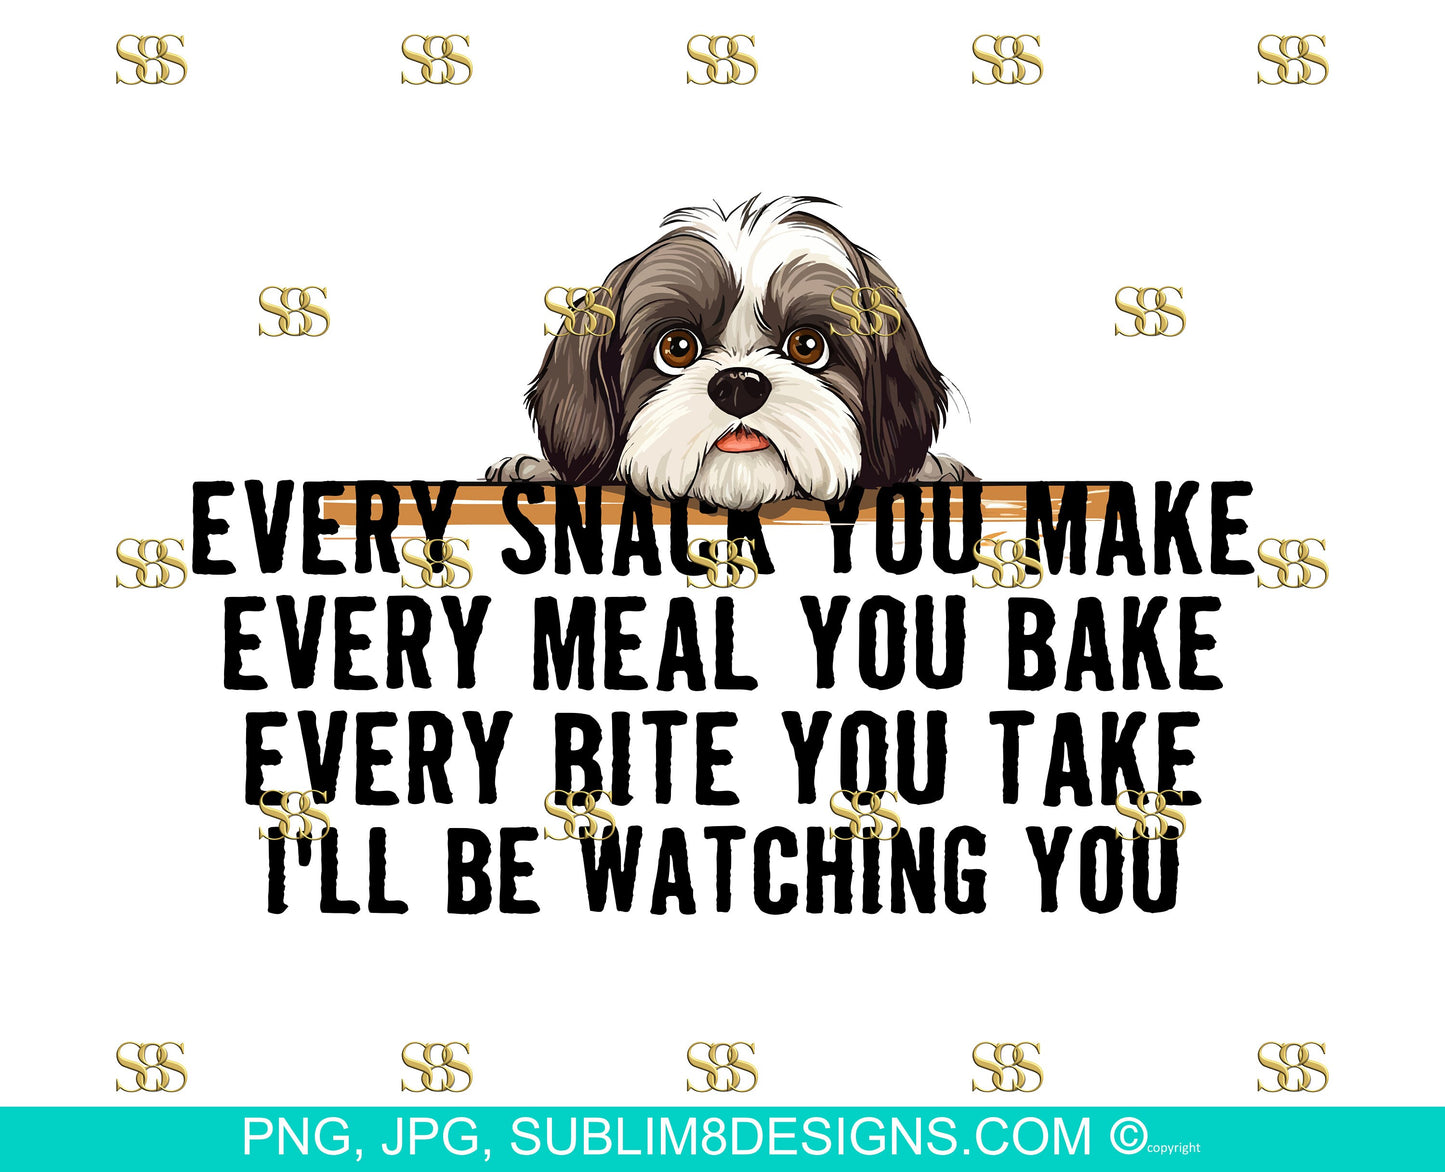 Snack-Obsessed Shih Tzu: The Hilarious Table Peeker! Every Bite You Take I'll Be Watching You PNG and JPEG ONLY